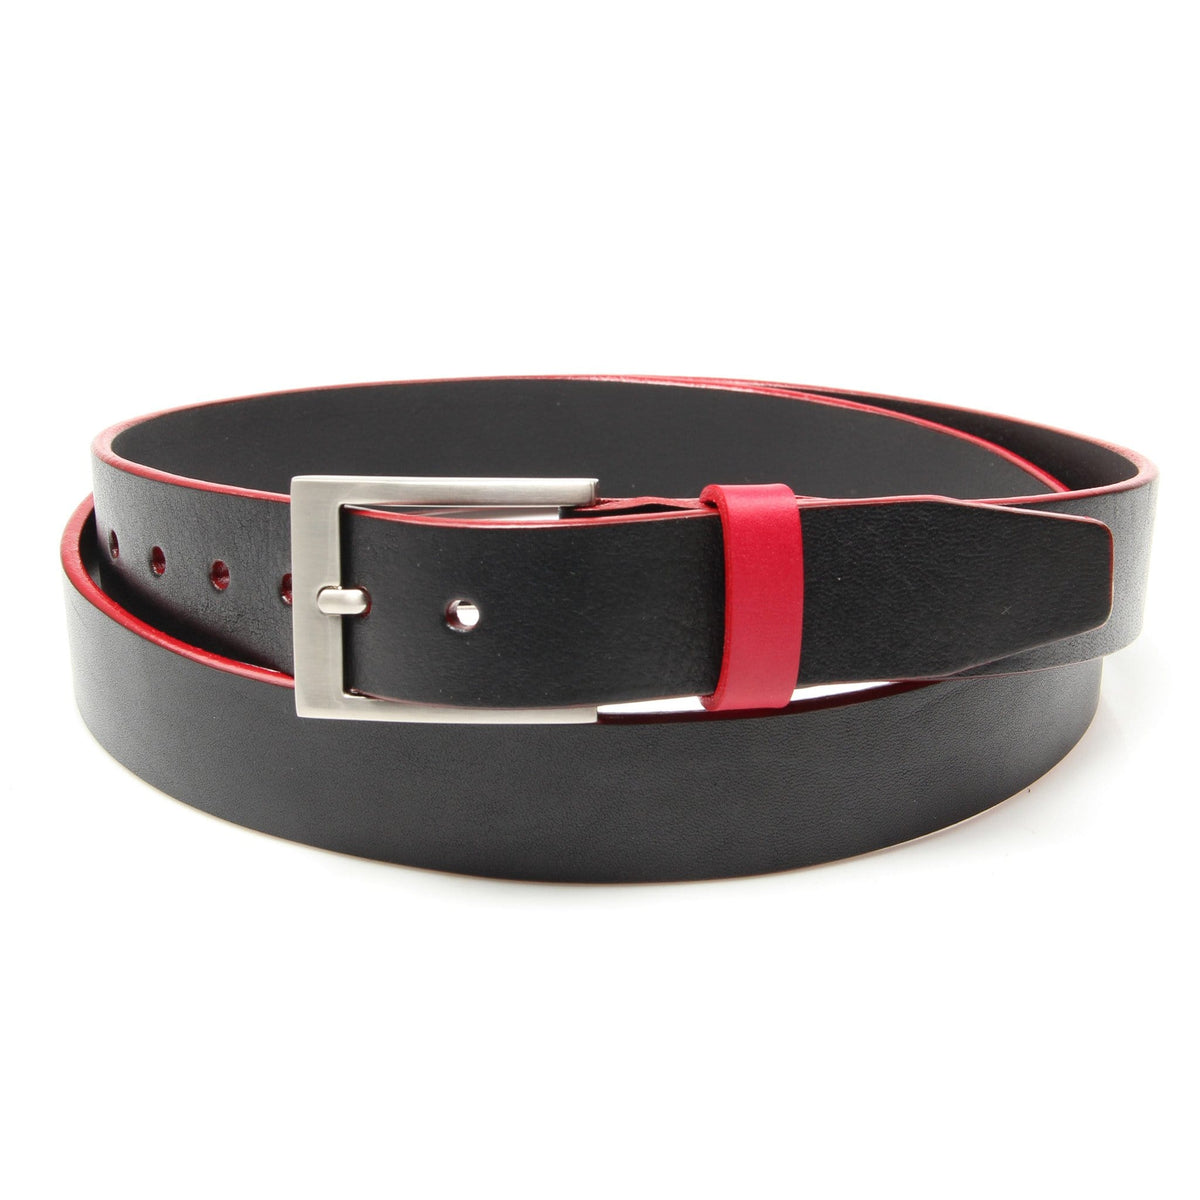 Black leather belt with Portsalon Red trim and keeper - Stolen Riches